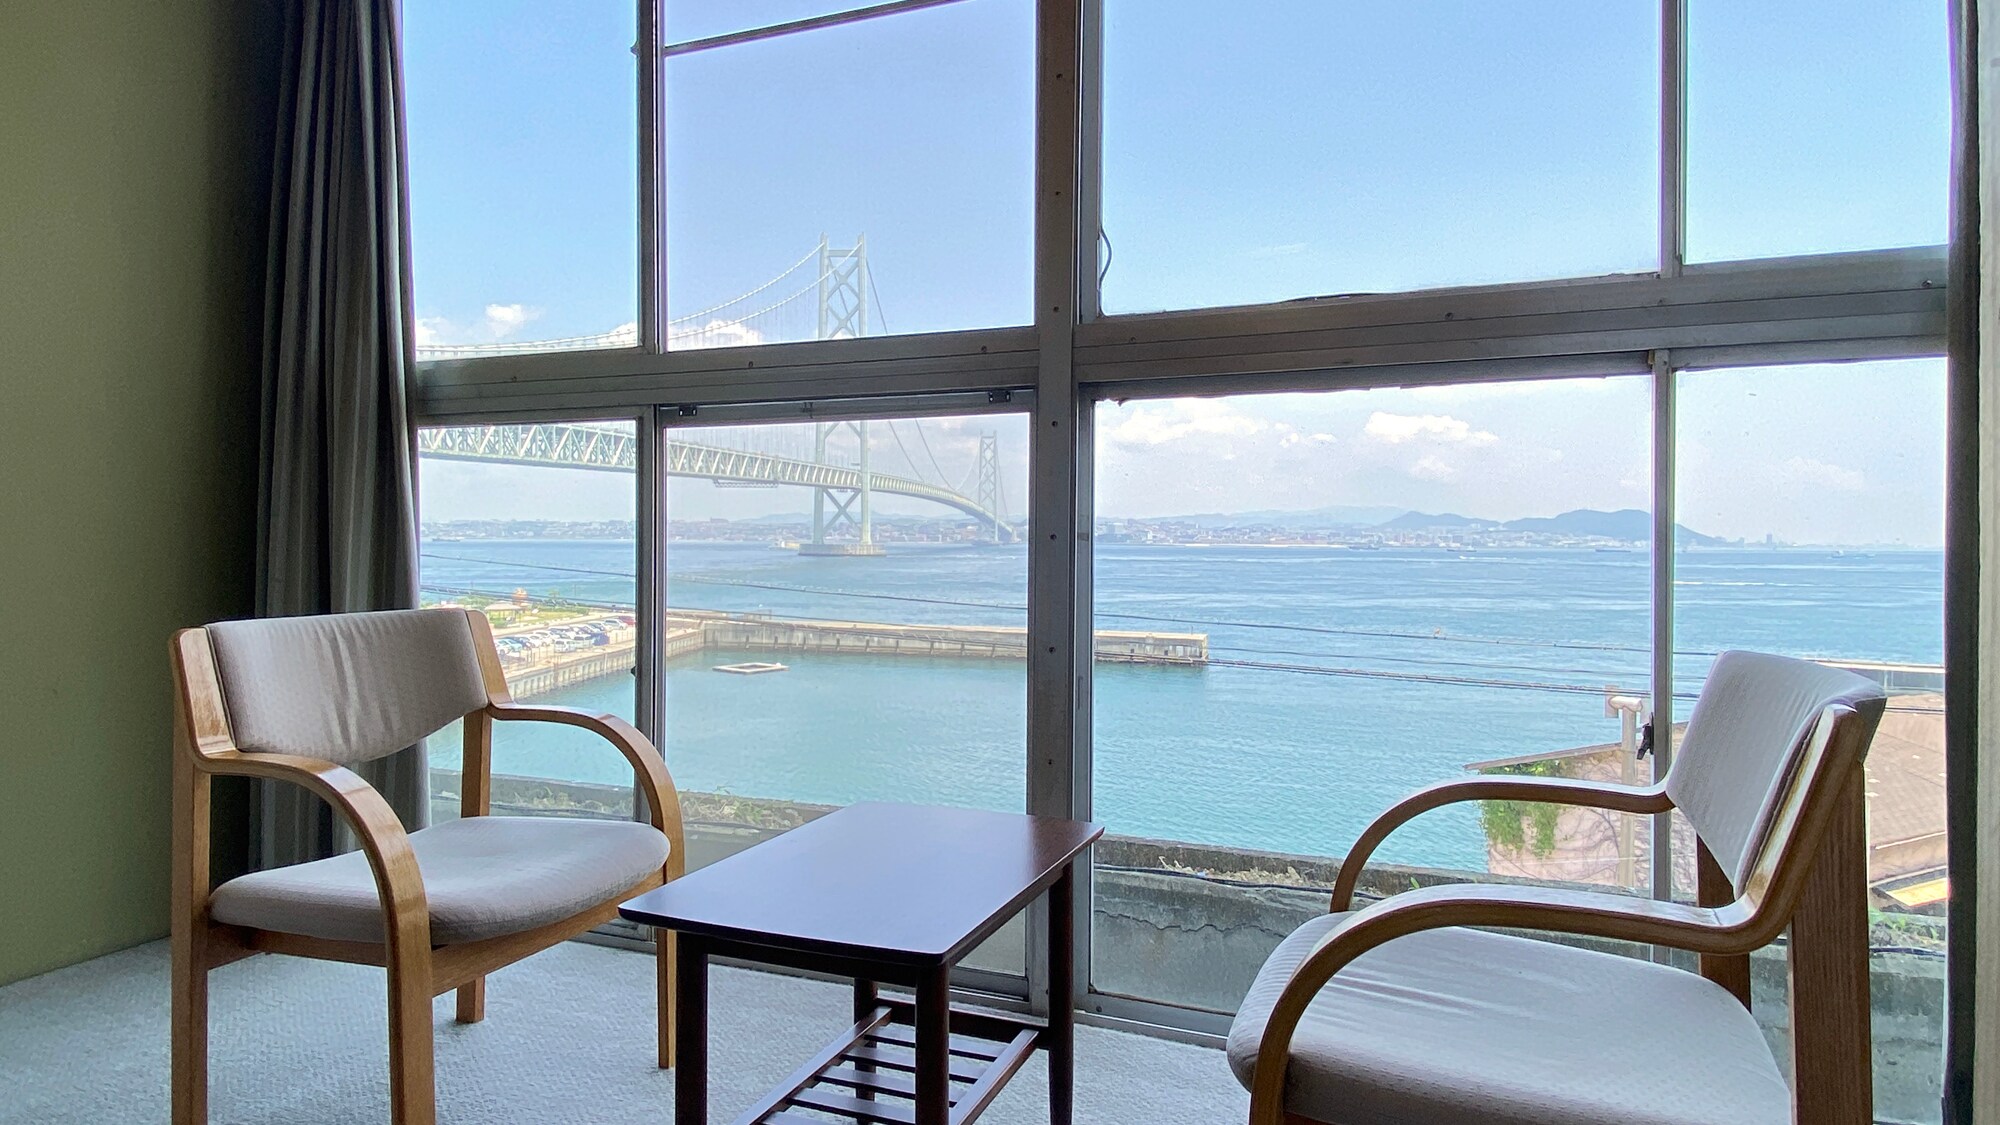 [Annex] You can relax while looking out over the Setoo Bridge and the cityscape of Kobe.